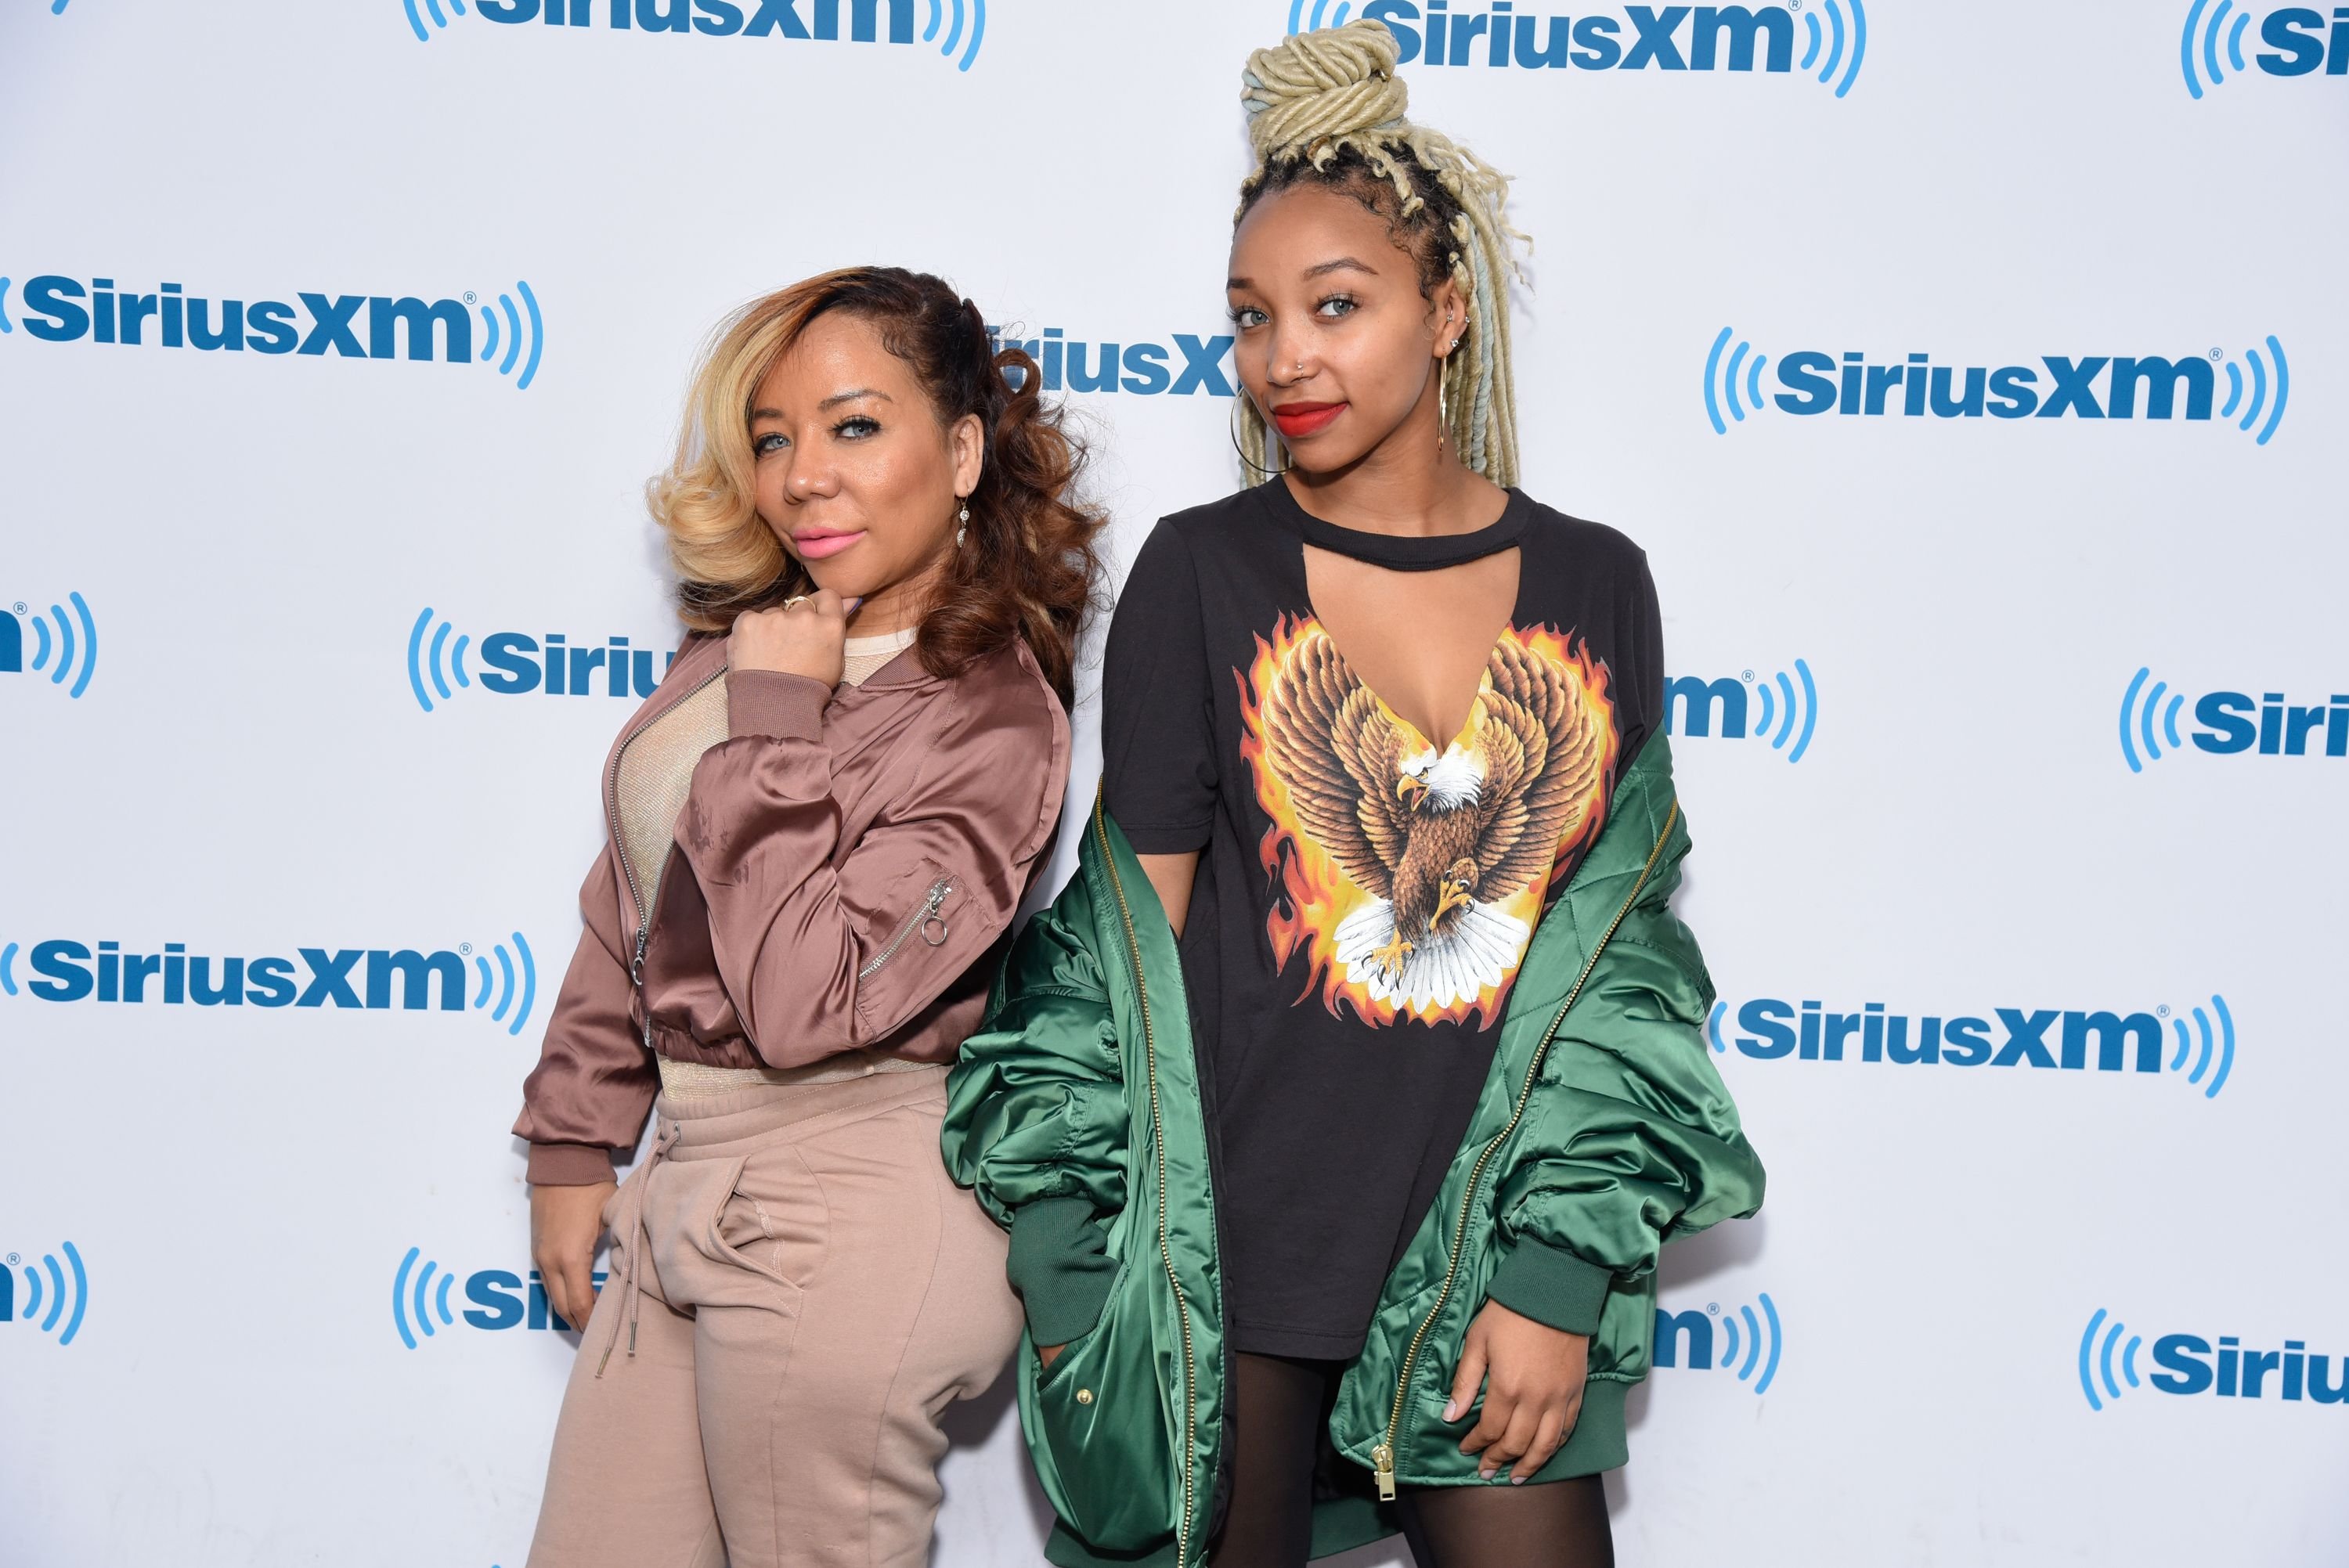 Tameka "Tiny" Harris and Zonnique Jailee Pullins at SiriusXM Studios on April 19, 2017 | Photo: Getty Images